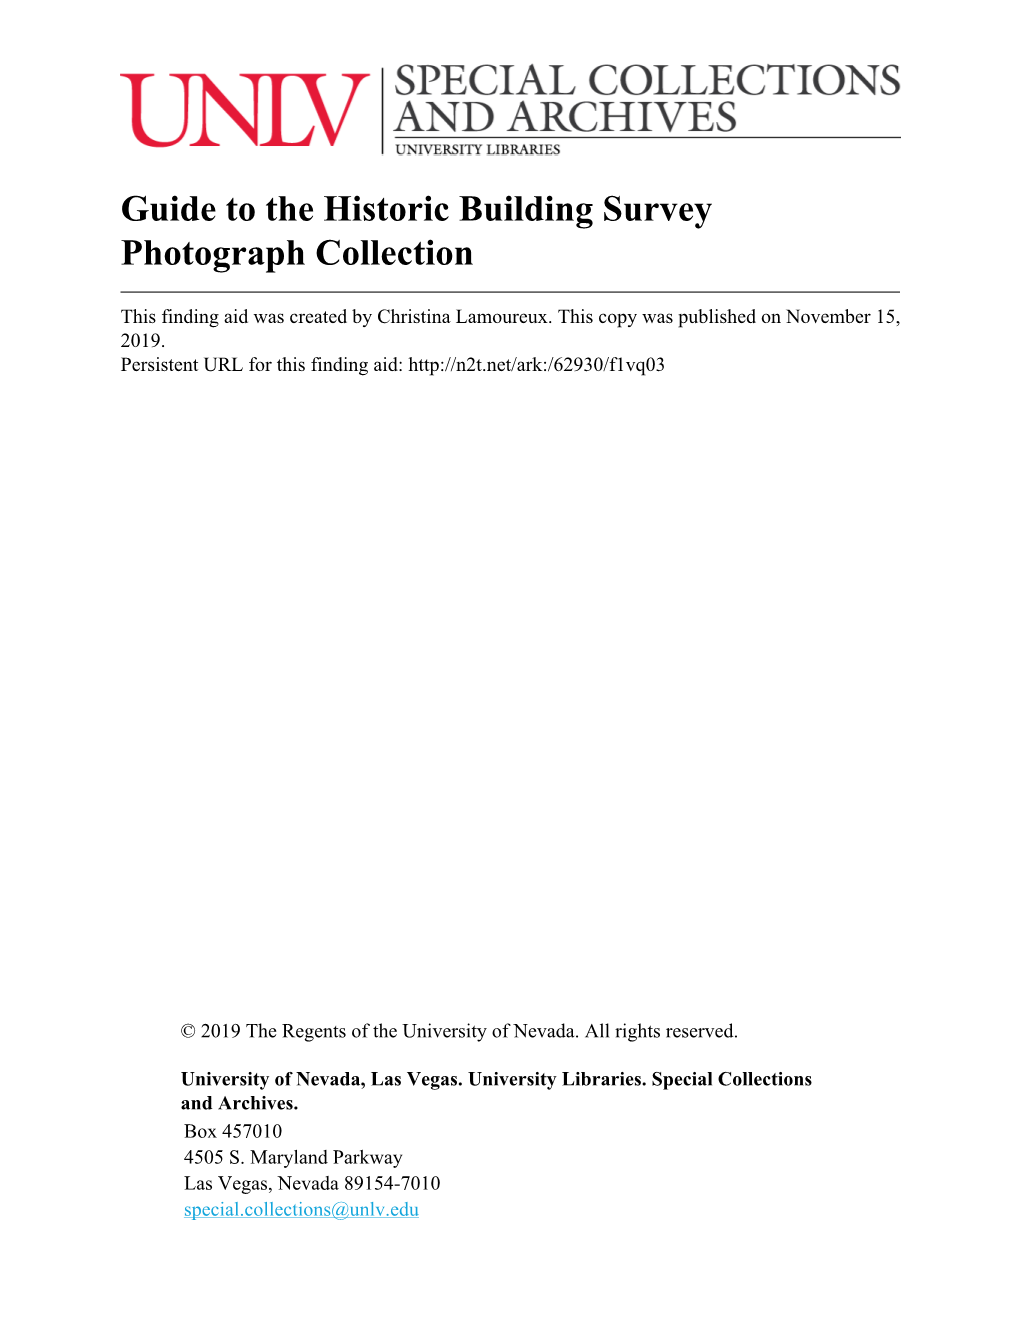 Guide to the Historic Building Survey Photograph Collection